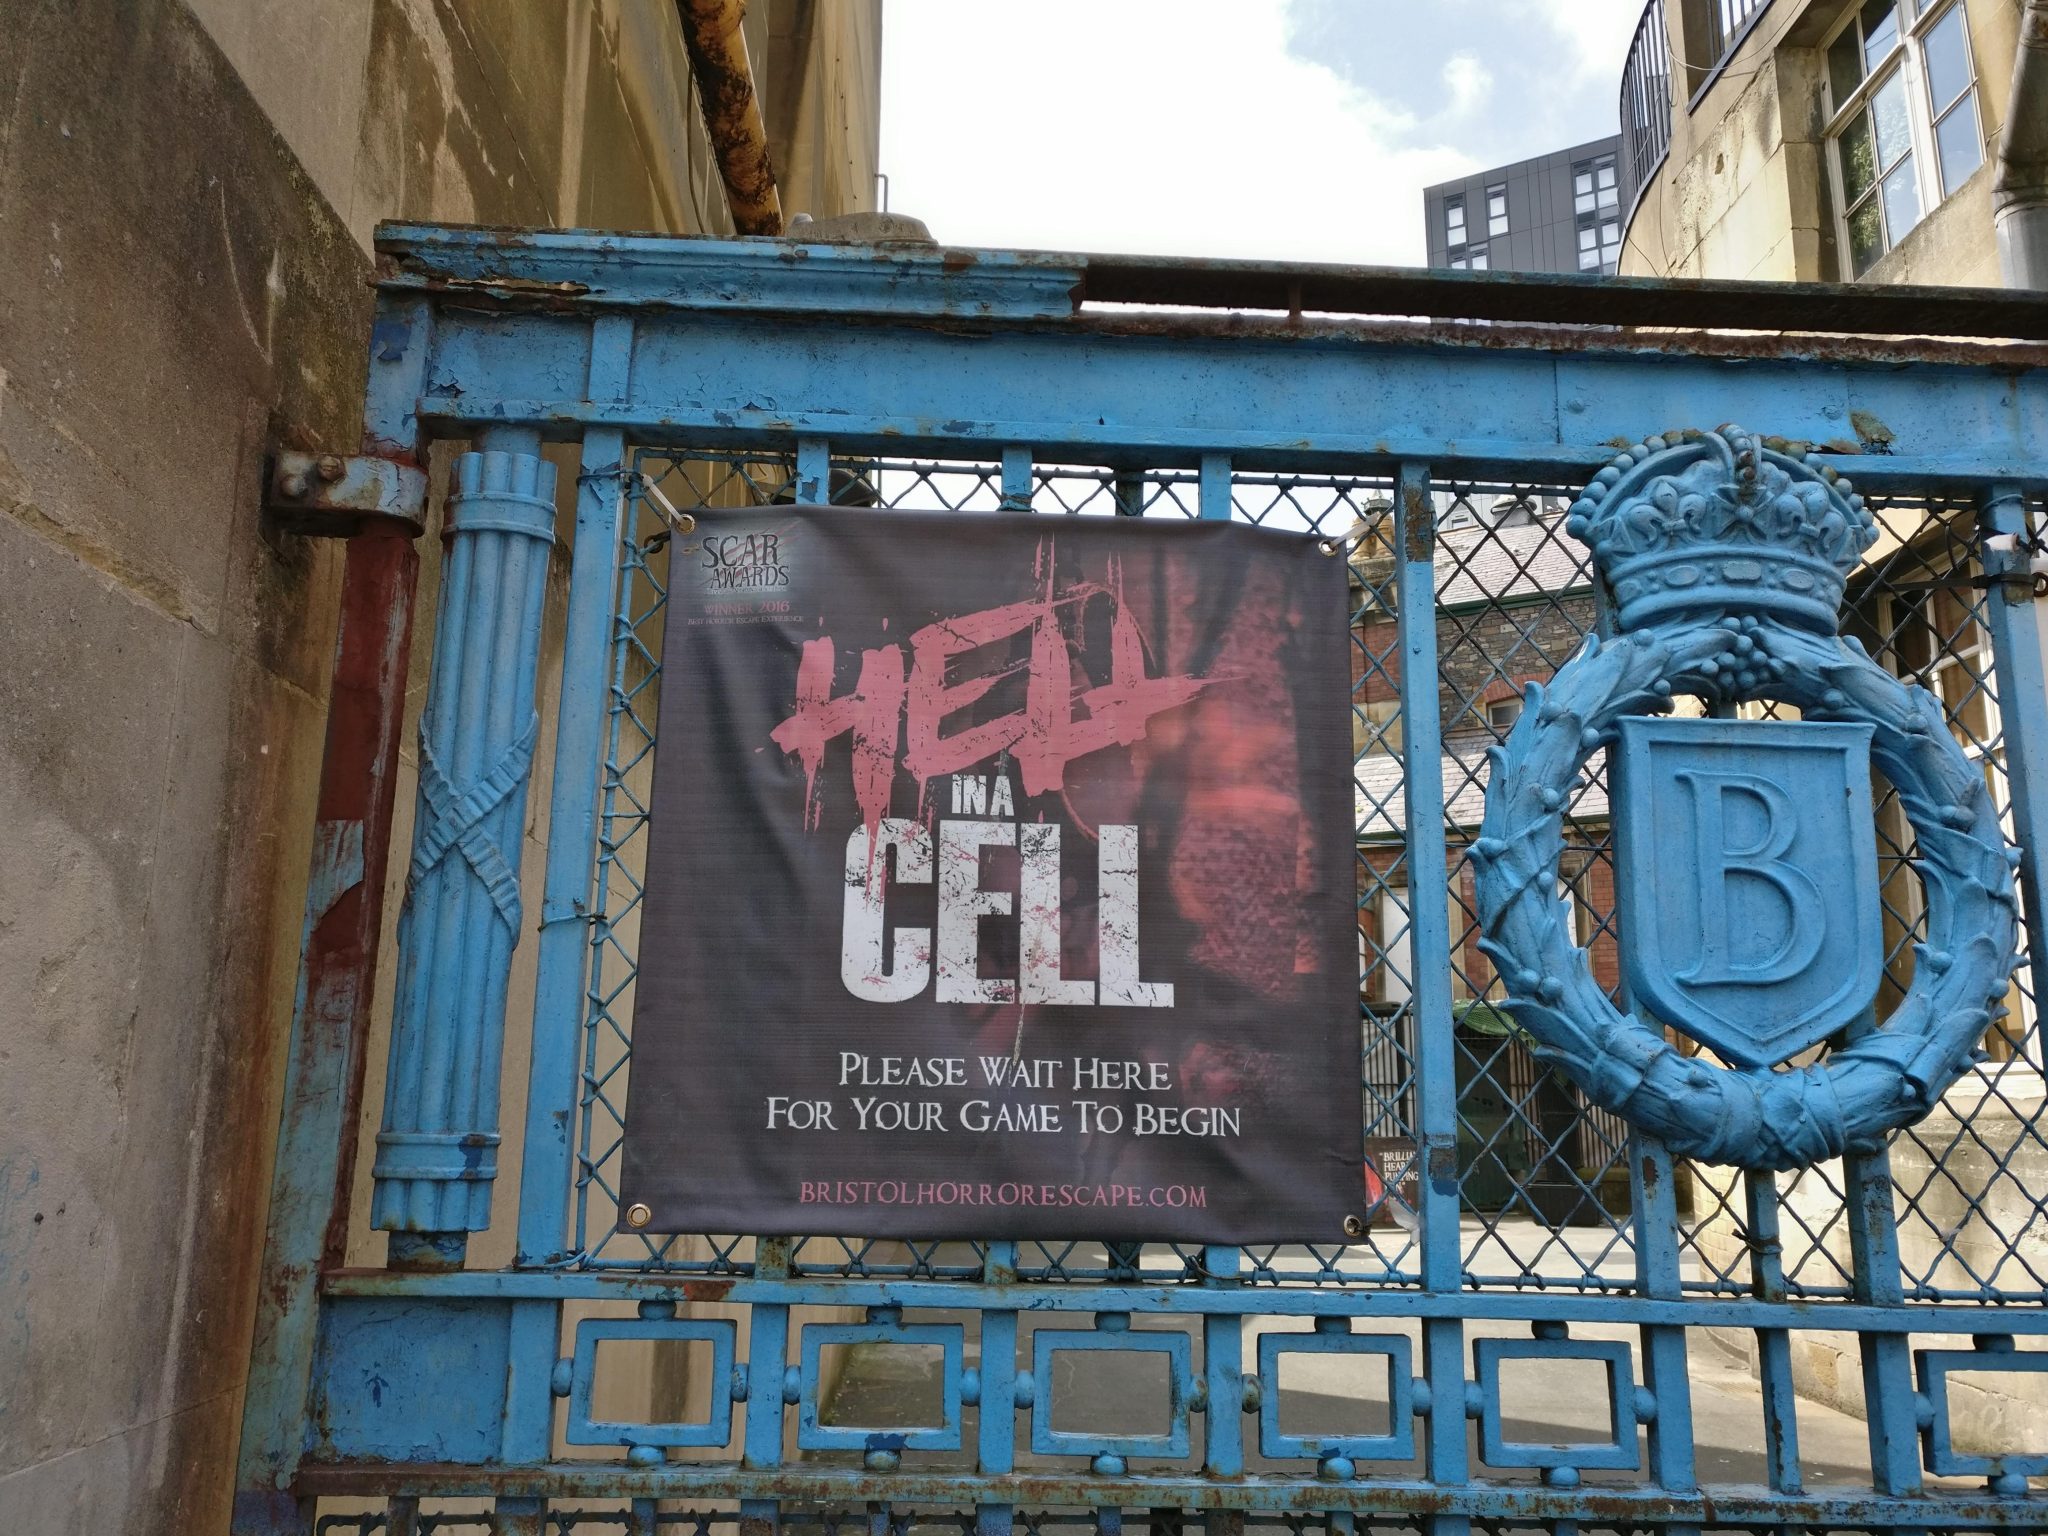 The entrance gate to Hell in a Cell